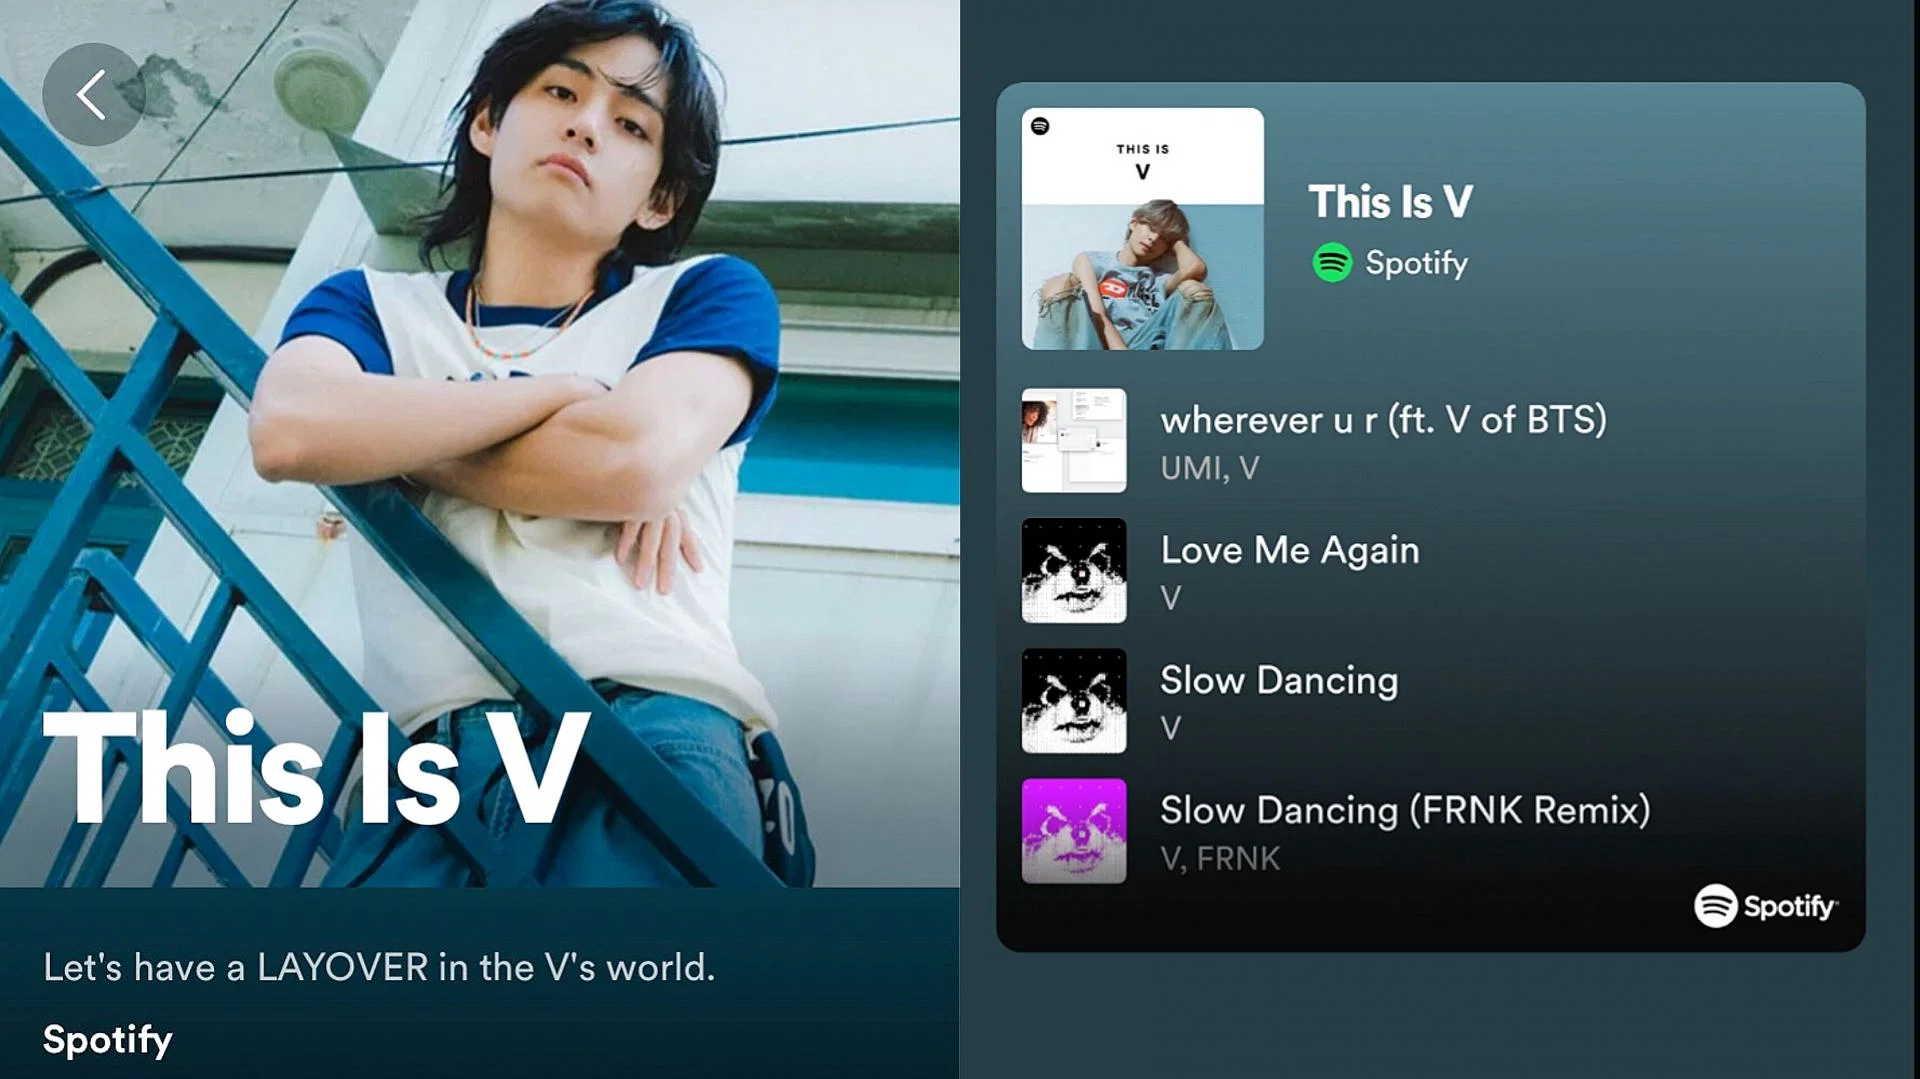 ARMYs over the moon as V finally gets his "This is V" official playlist on Spotify